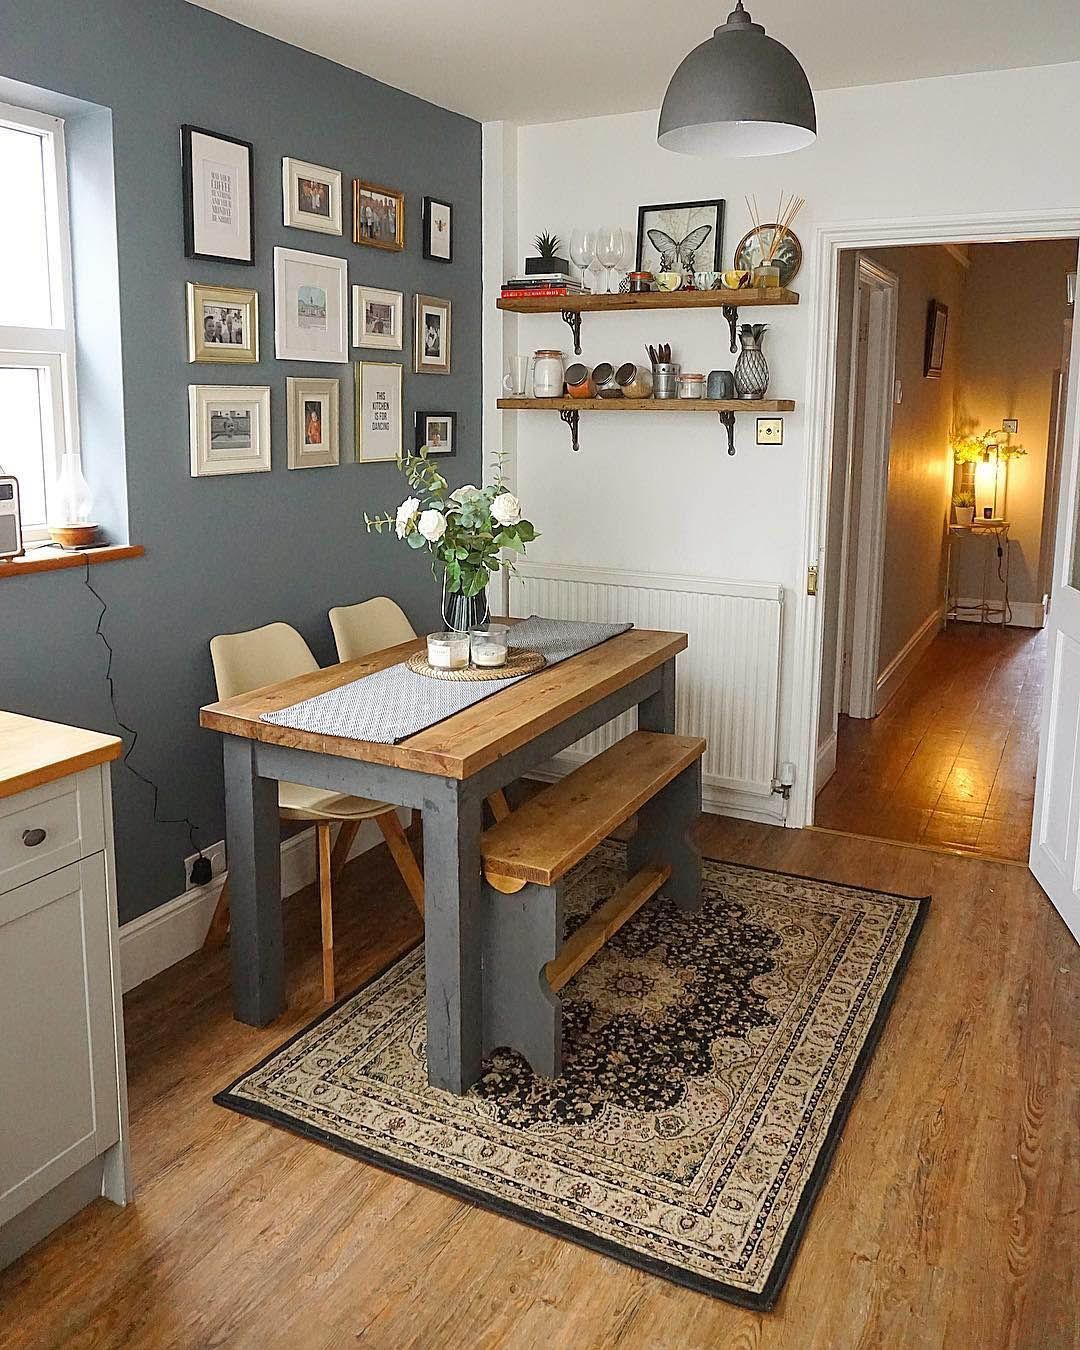 Why you need to have a small kitchen
table